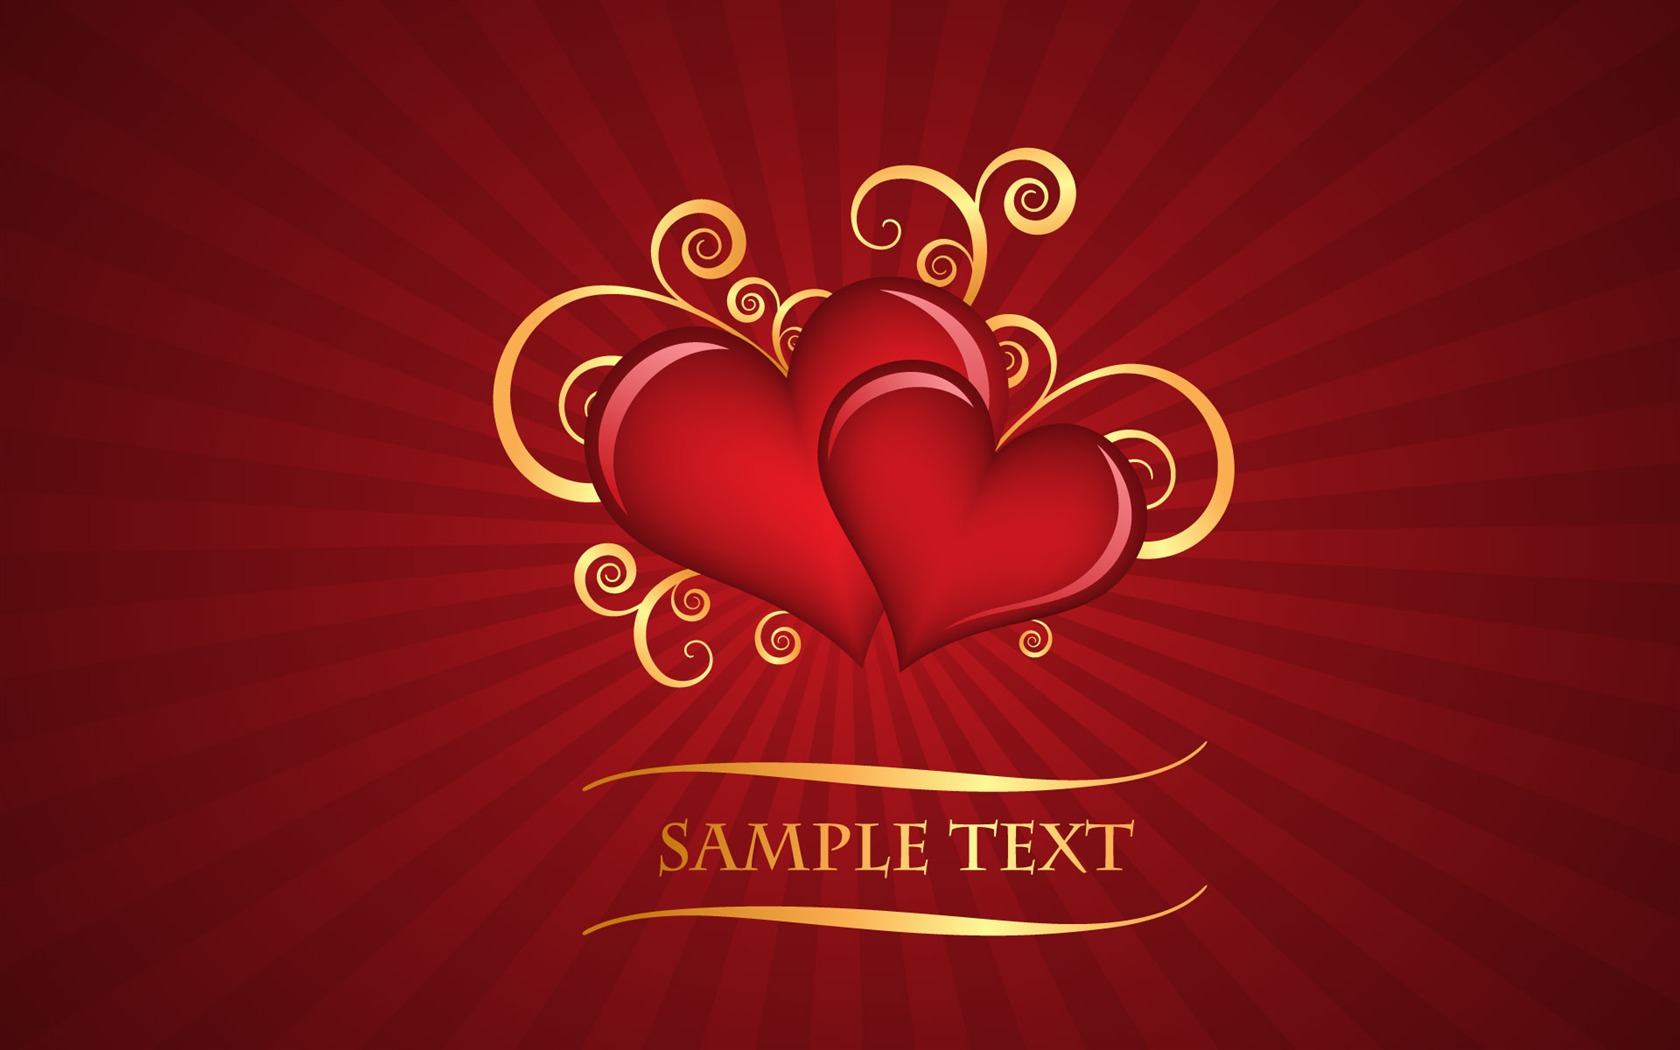 Valentine's Day Theme Wallpapers (6) #9 - 1680x1050